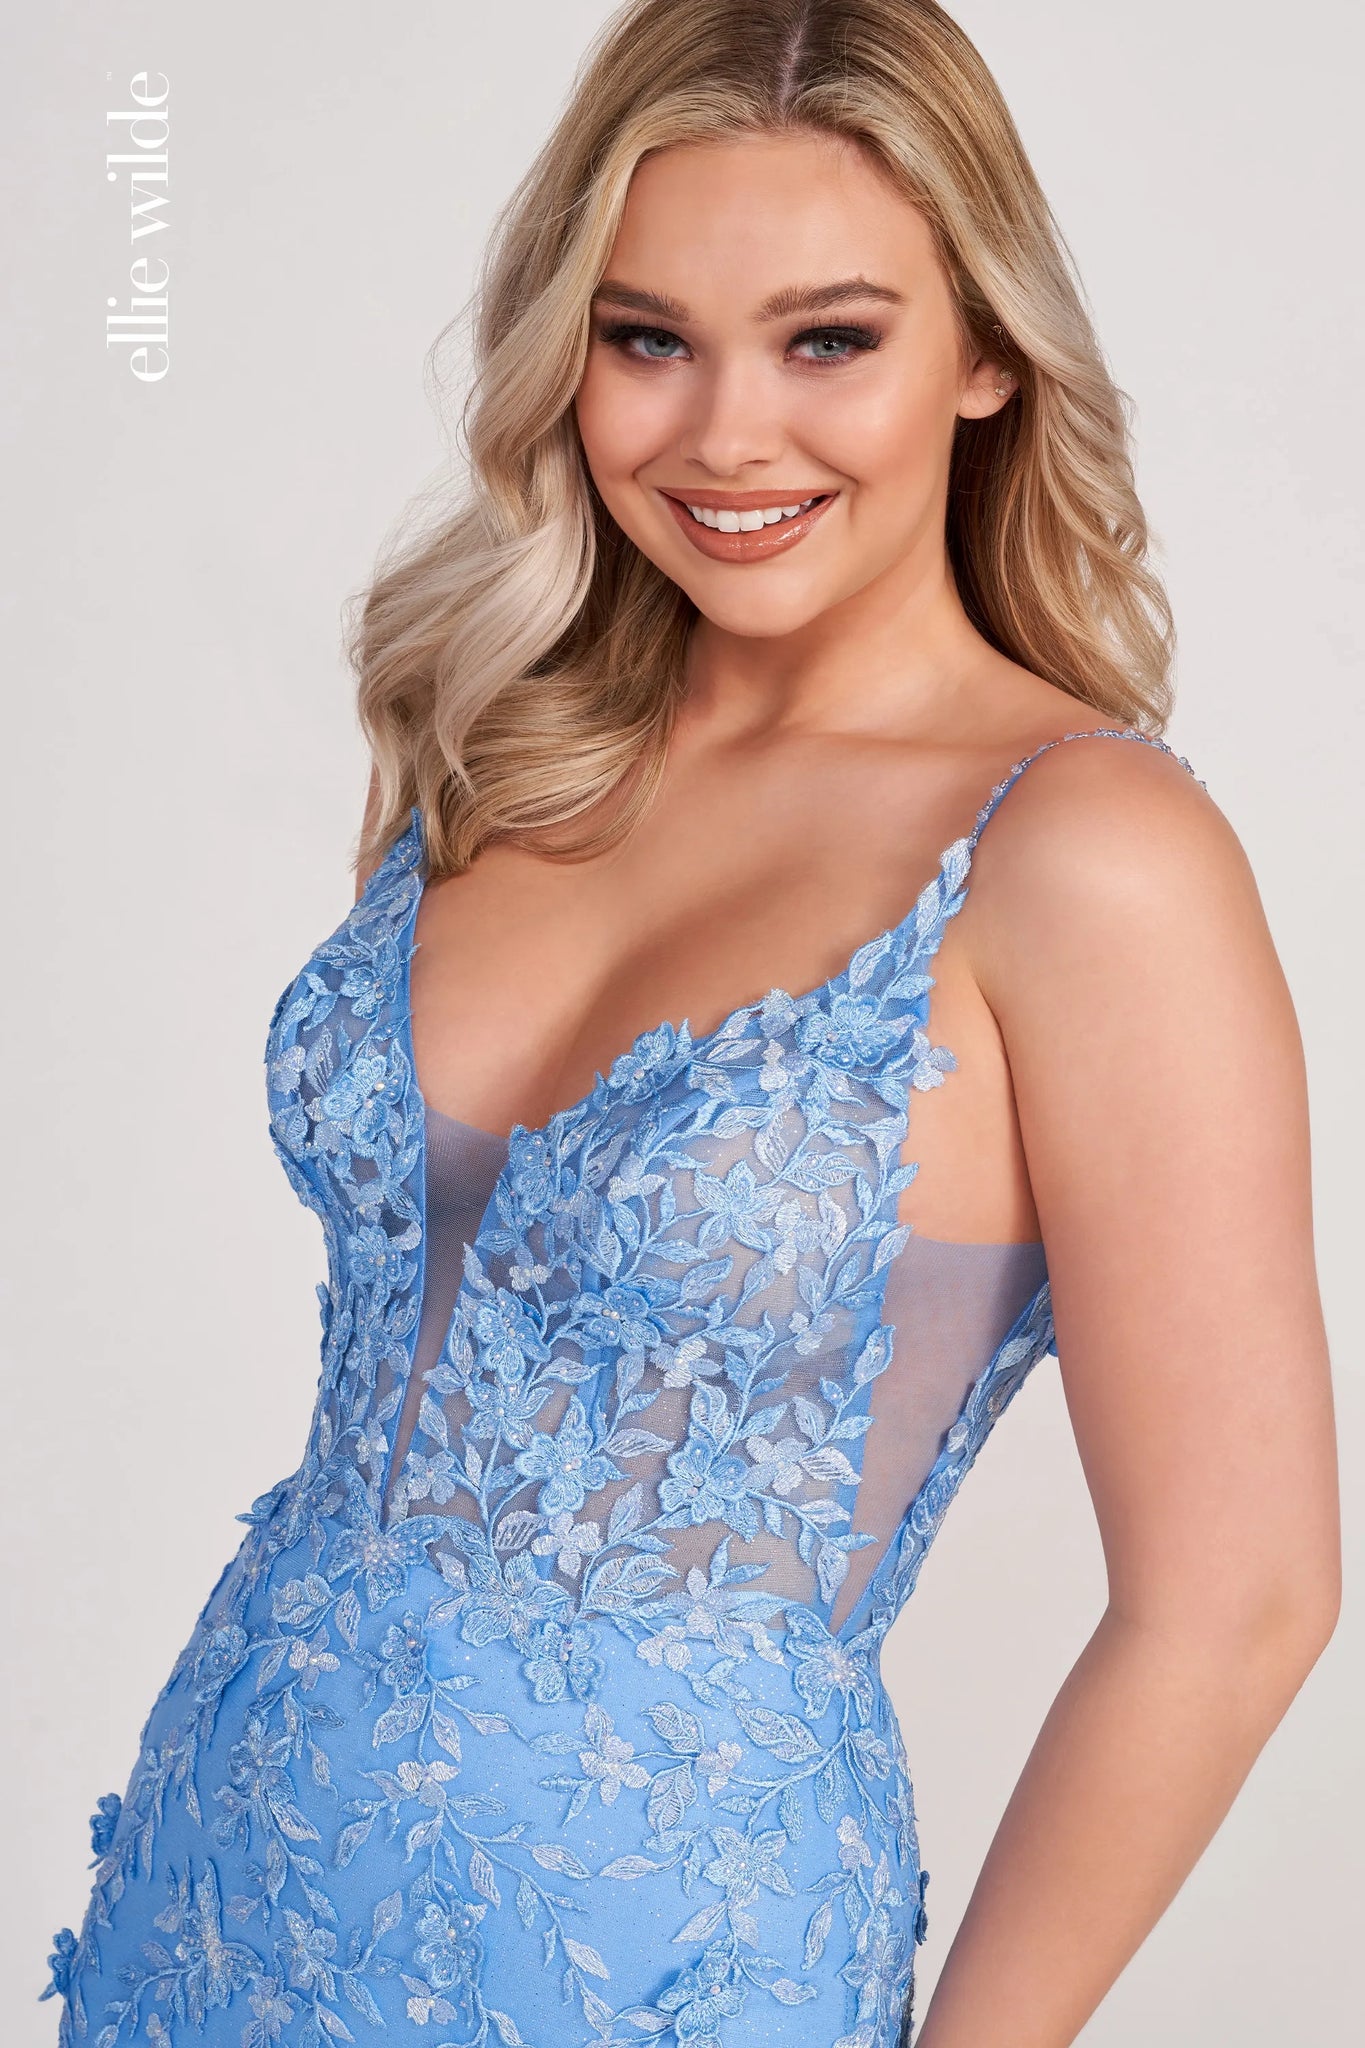 Embrace your celestial charm in this heavenly dress by Ellie Wilde. Designed with a mermaid silhouette, the dress is designed with a faux plunging neckline and a sheer corset bodice. The dress is embellished with beautiful flower appliques and gives the most heavenly elegance.